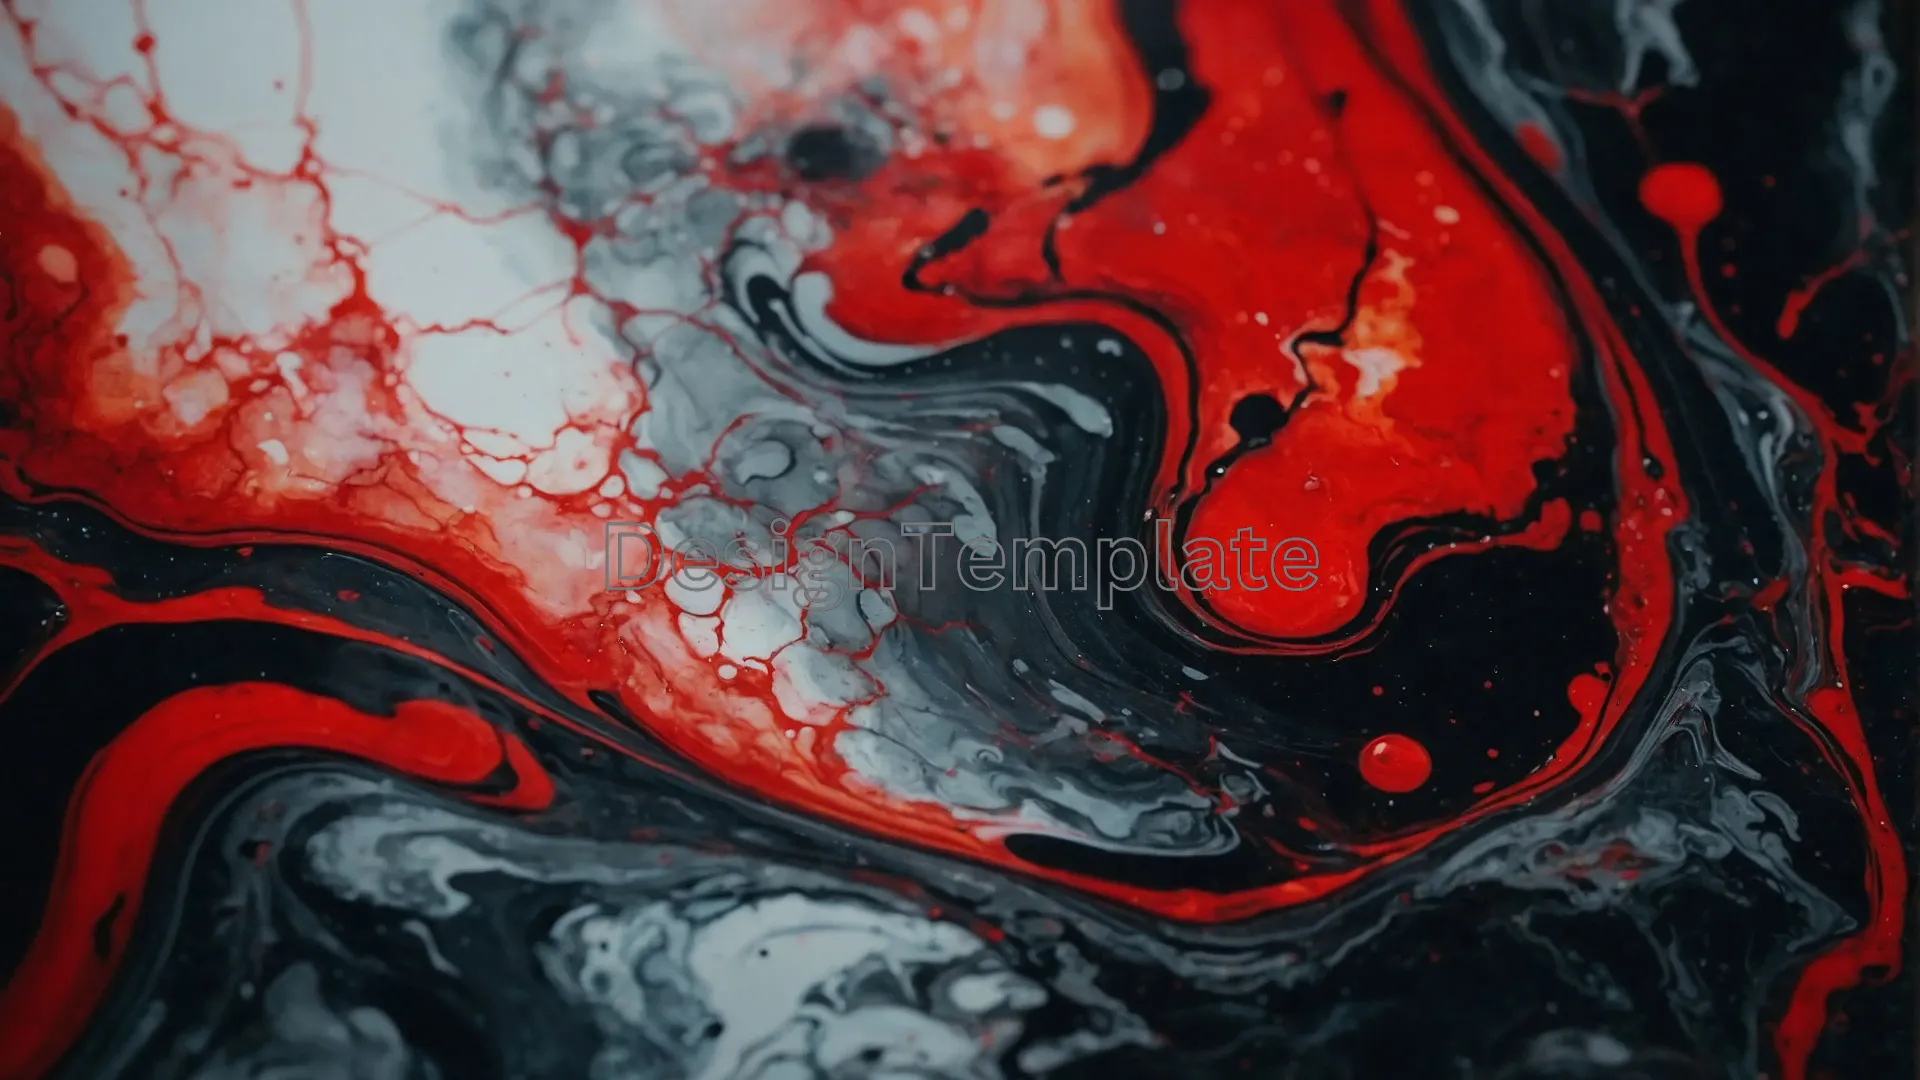 Abstract Red and Black Marble Texture Image Download